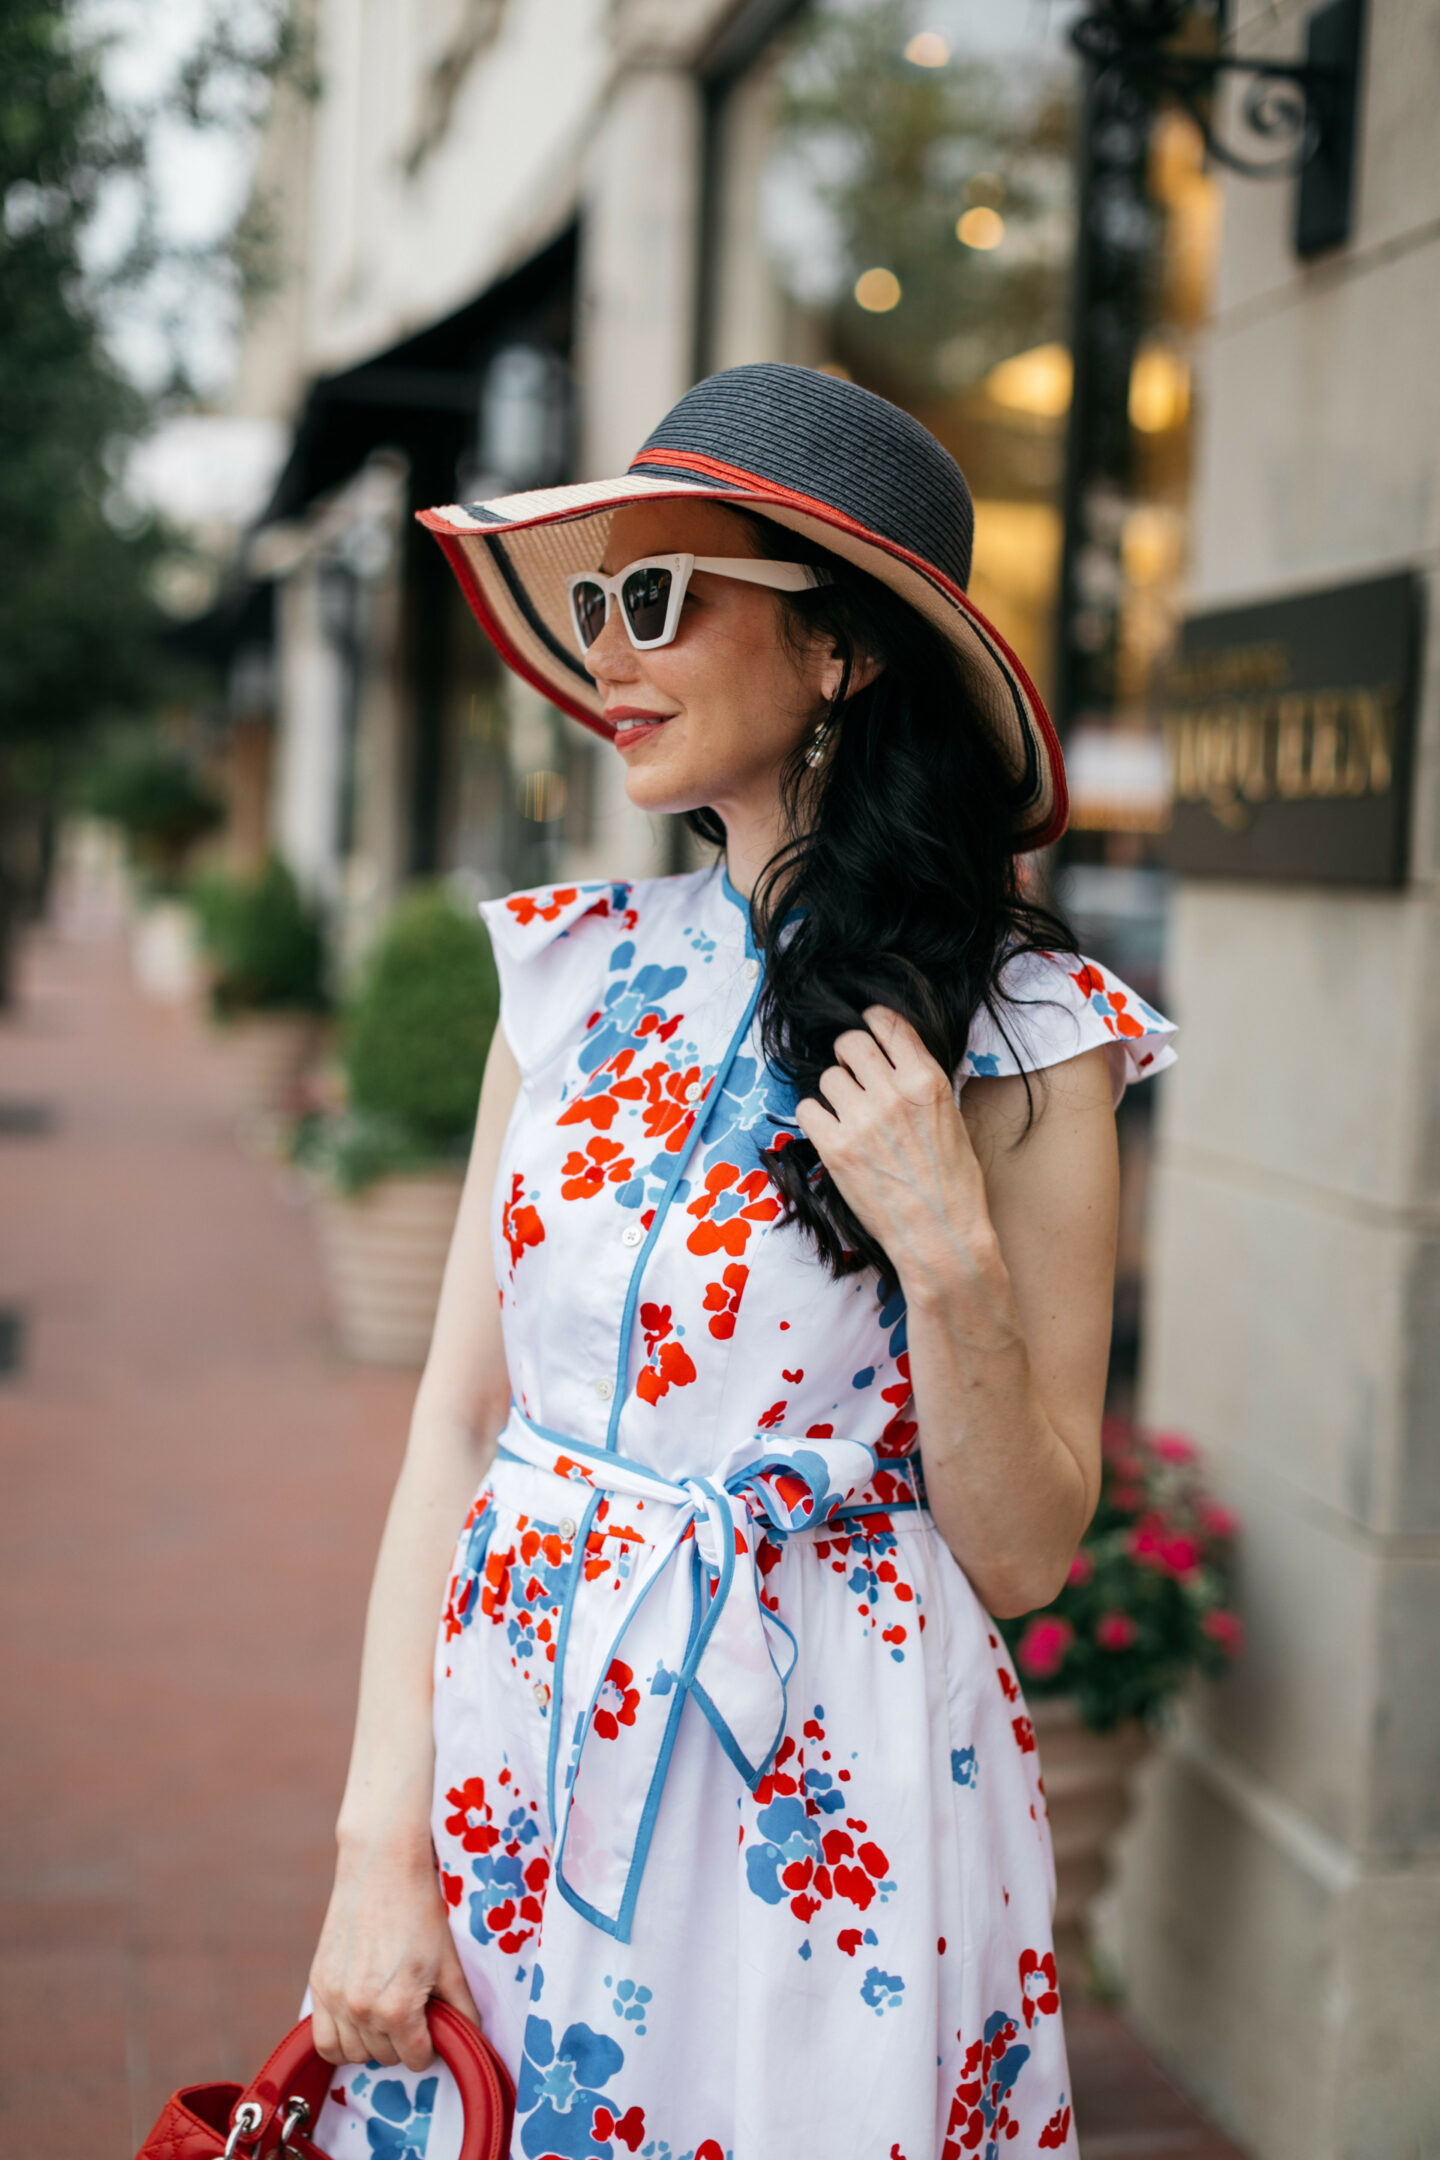 Brooks Brothers Shirt Dress, Tommy Hilfiger Sunhat, Italic Cateye Sunglasses | Brooks Brothers Shirt Dress by popular Dallas fashion blog, Pretty Little Shoppers: image of a woman walking in  Highland Park Village and wearing a red, whites and blue Brooks Brothers shirt dress, white frame sunglasses, and wearing a red and black stripe straw hat while holding a red handbag. 